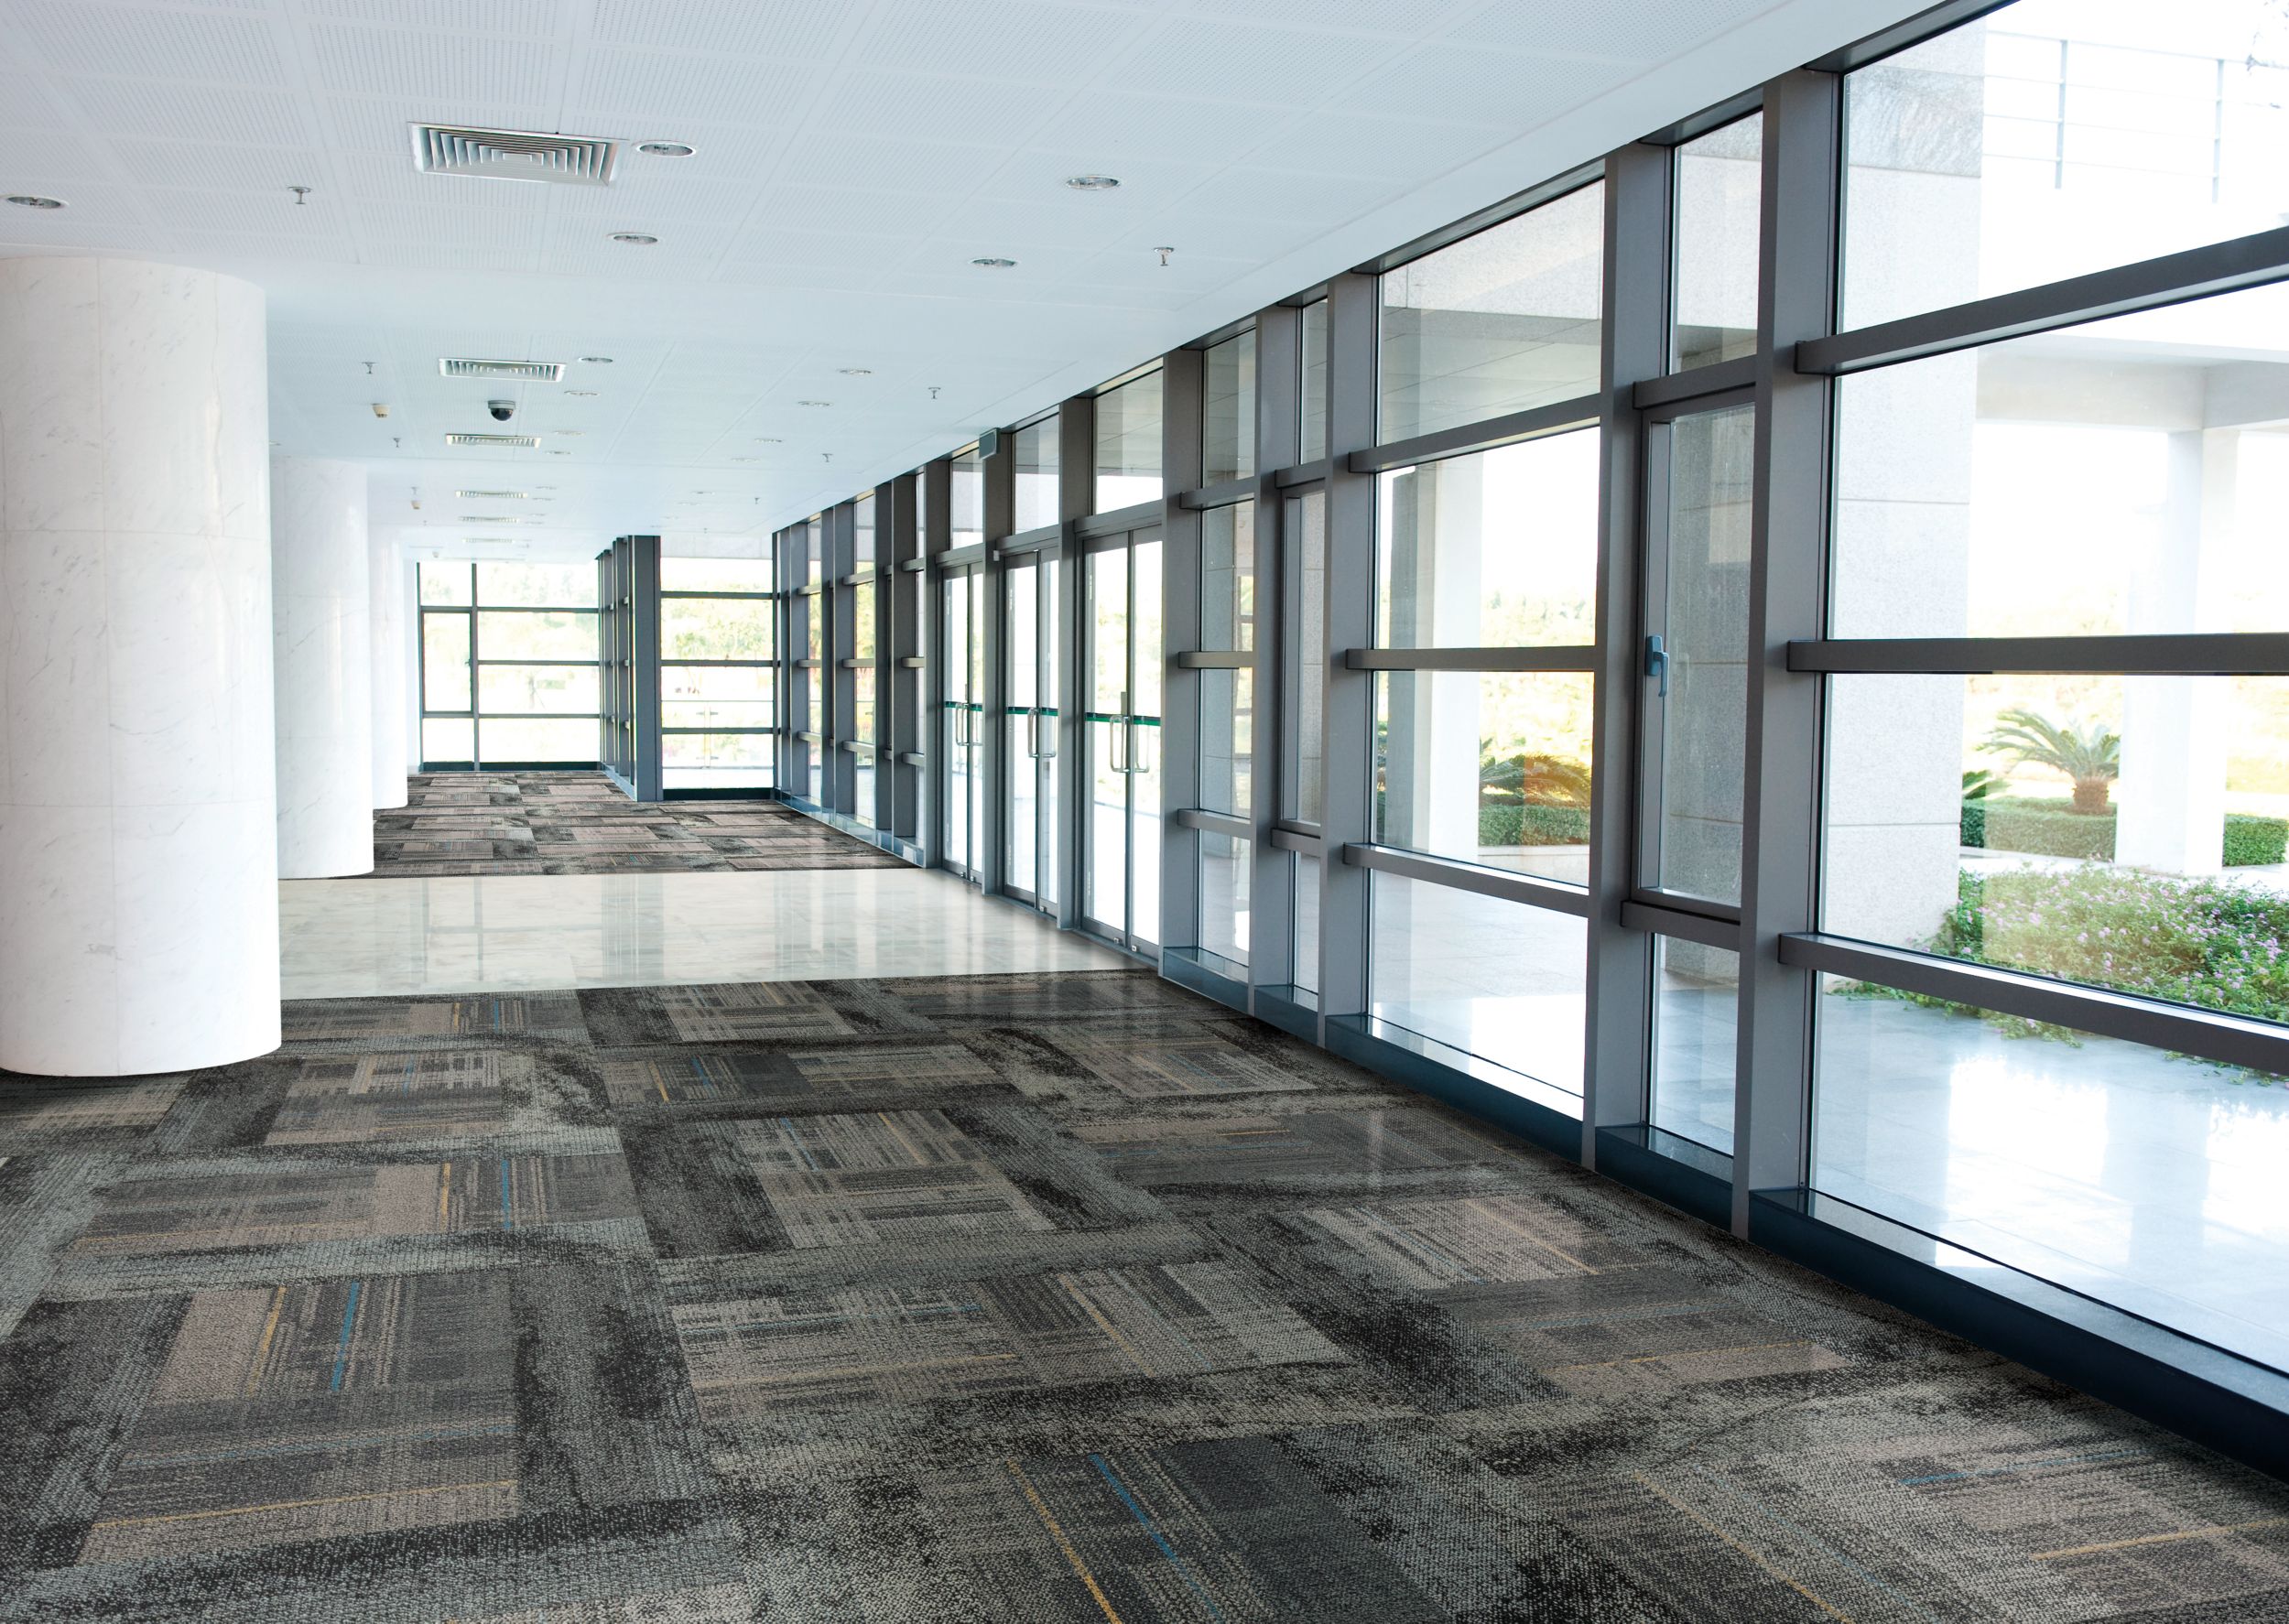 Interface AE312 carpet tile with Neighborhood Smooth plank carpet tile and Interface Textured Stones LVT in corridor with glass walls numéro d’image 7